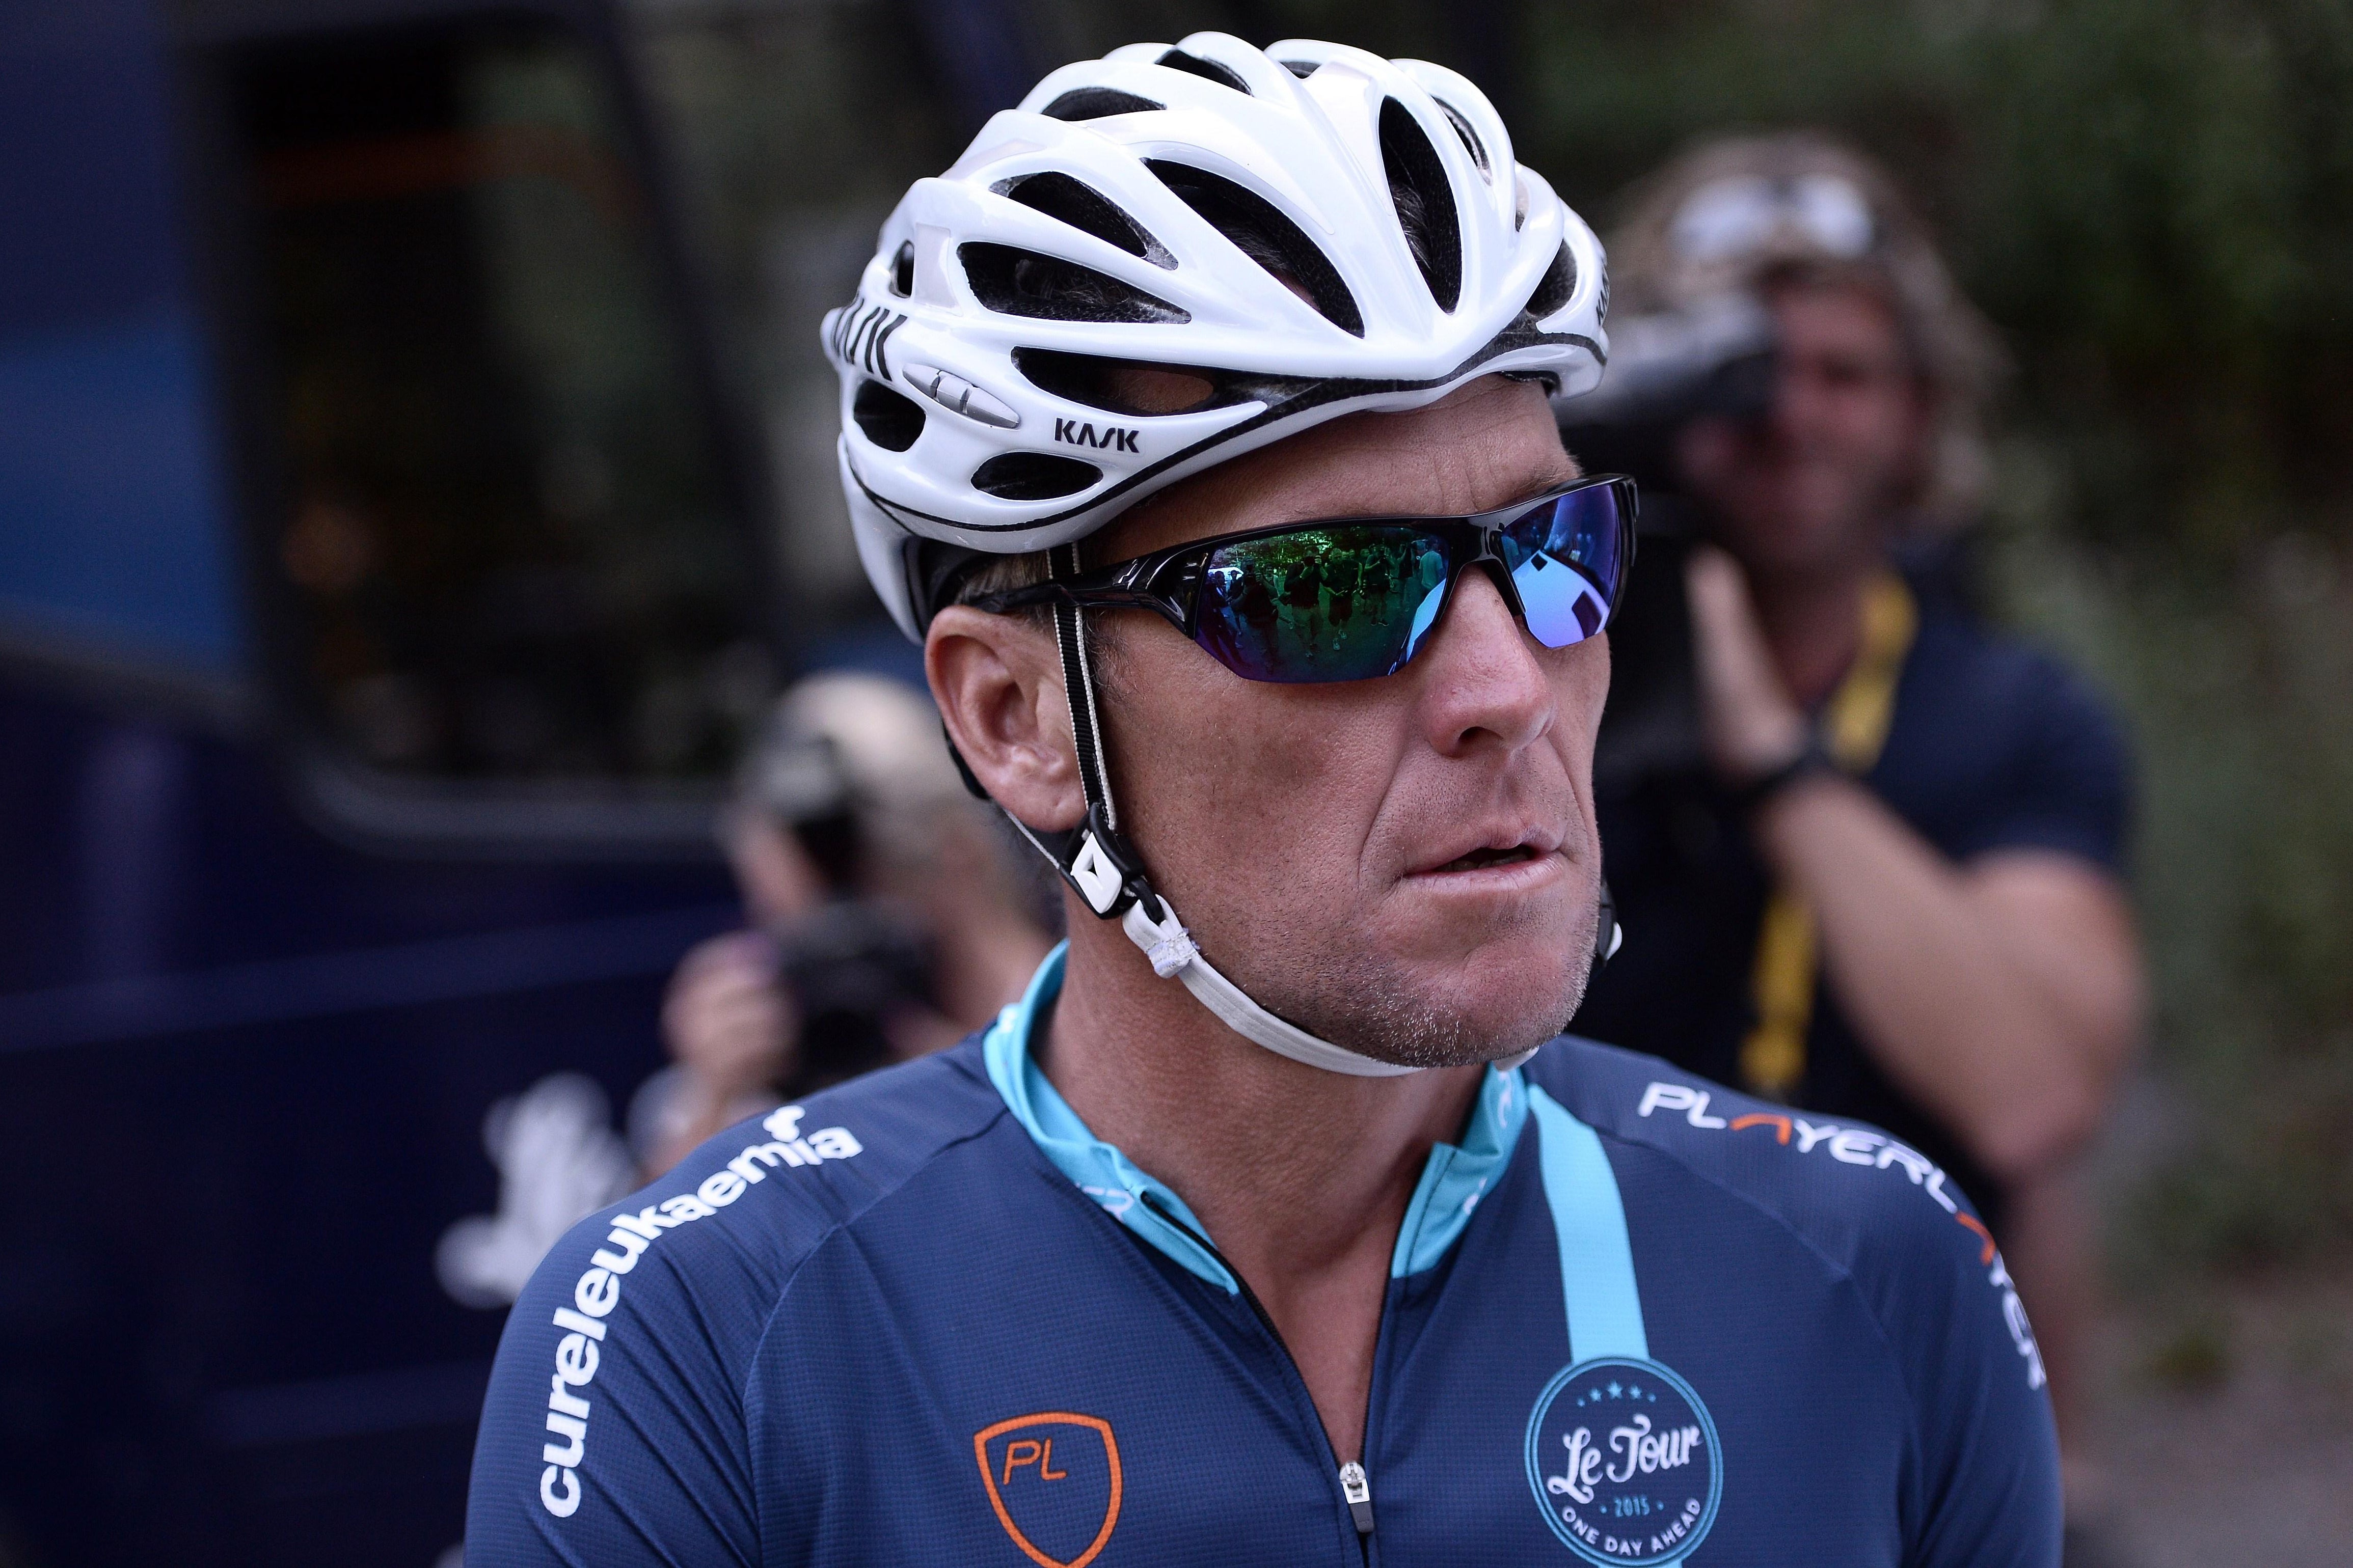 The Slatest for June 28: Why Lance Armstrong Has the Trans Athlete Debate All Wrong Slate Staff